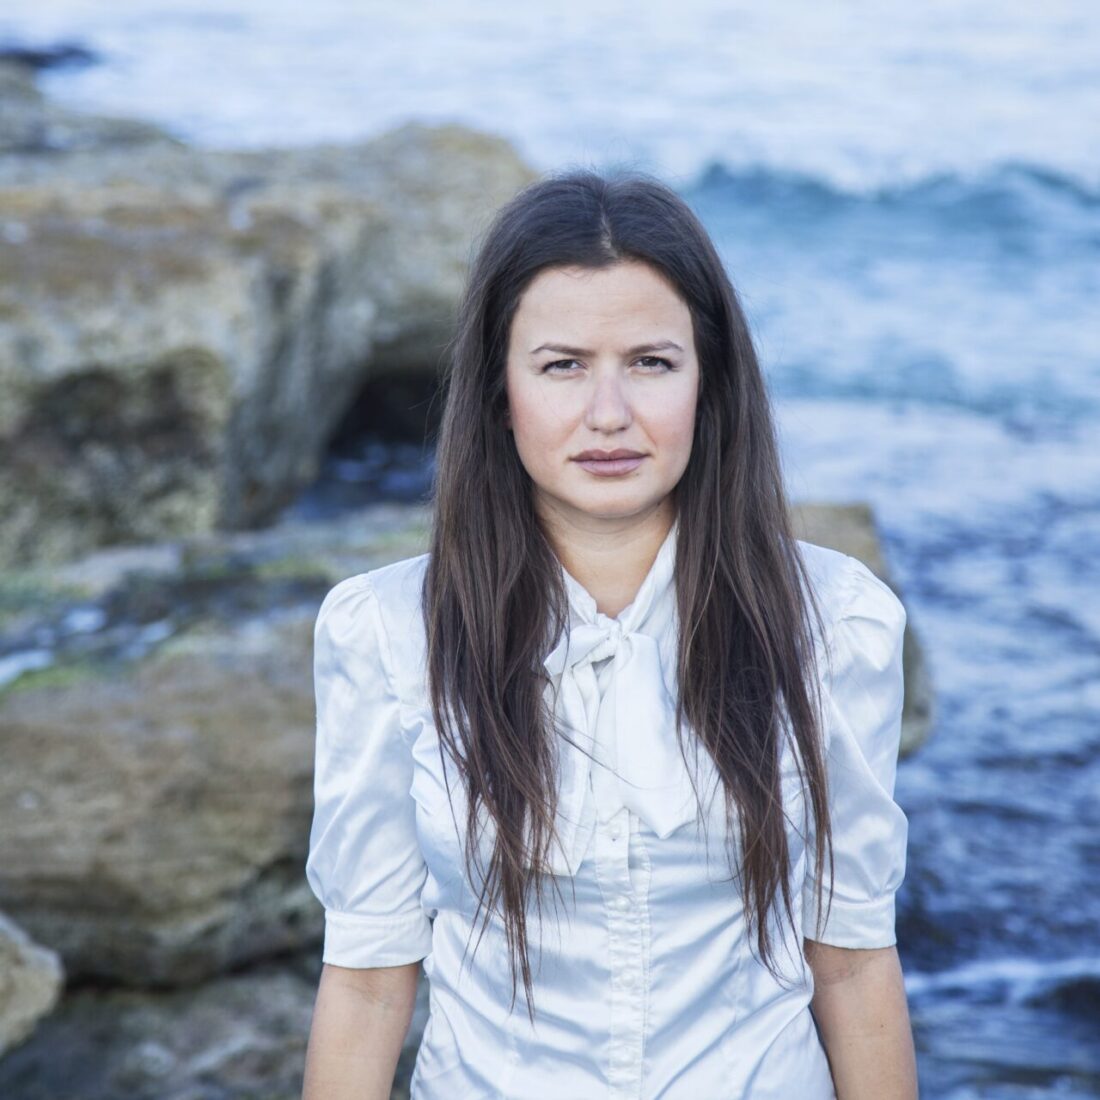 Eco Wave Power founder and CEO Inna Braverman. Photo courtesy of Sustainable Markets Initiative